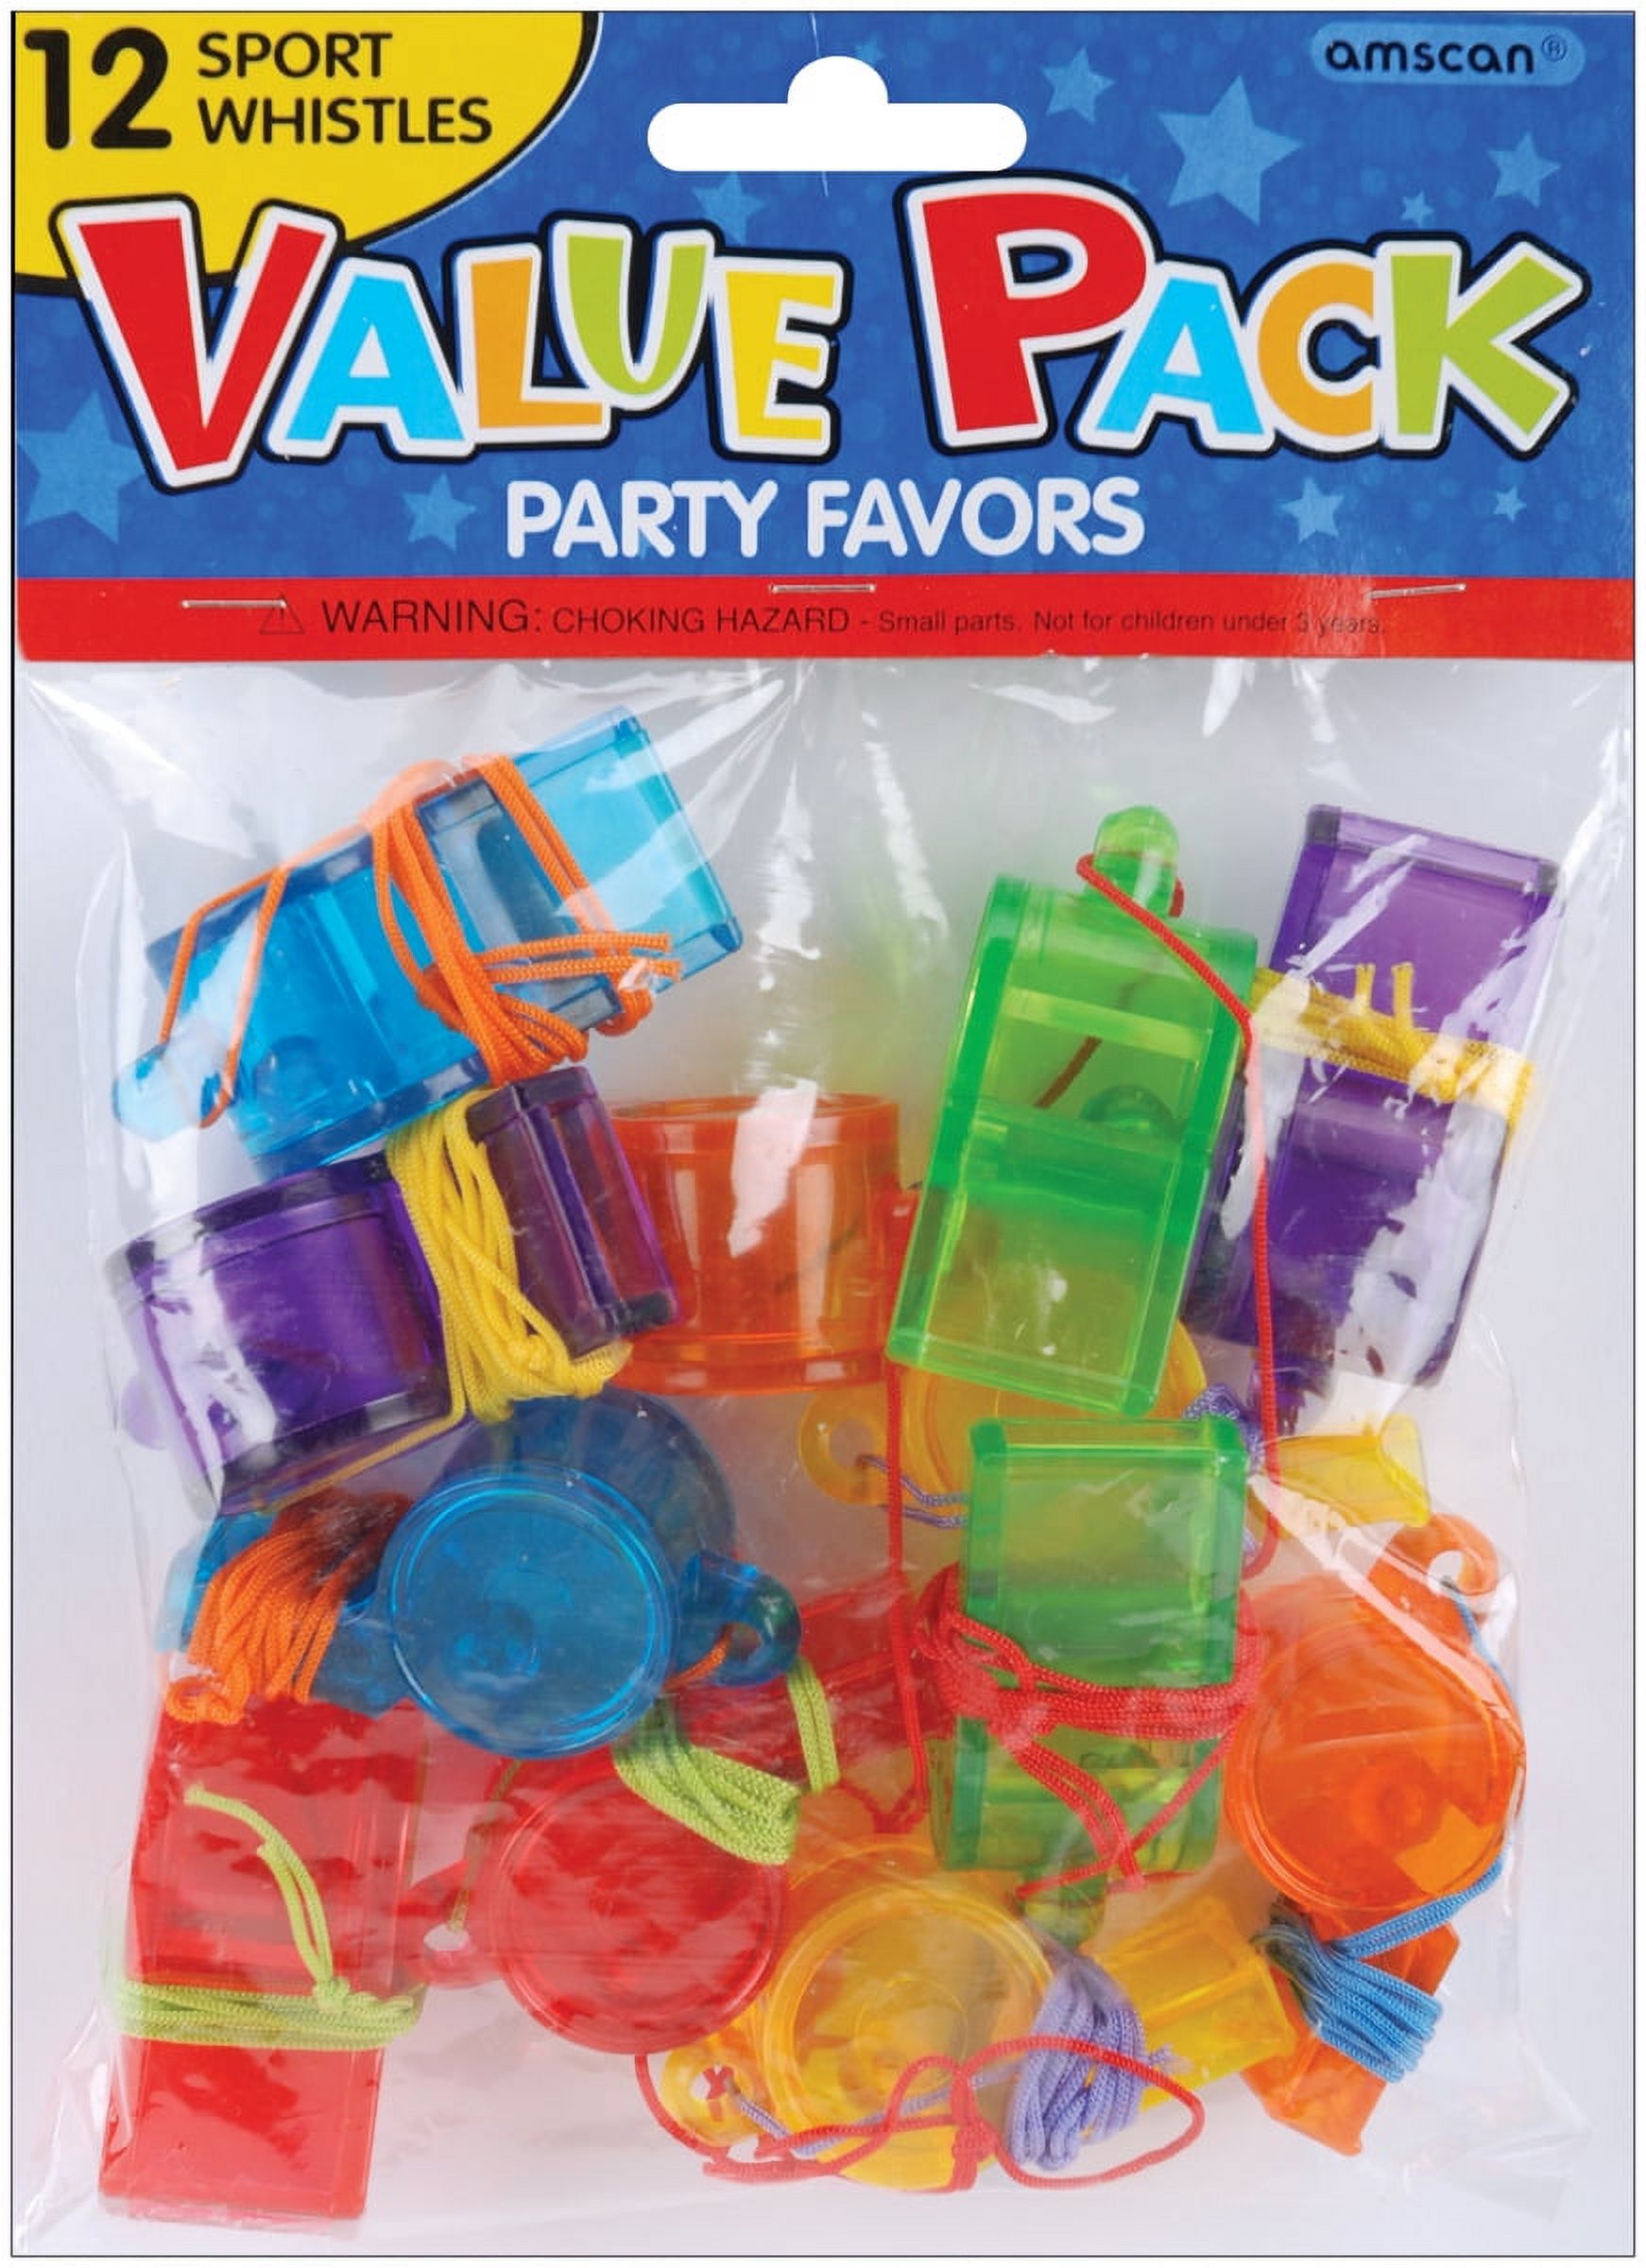 Party Favors 12/Pkg-Sports Whistles, Pk 3, Amscan - image 2 of 2